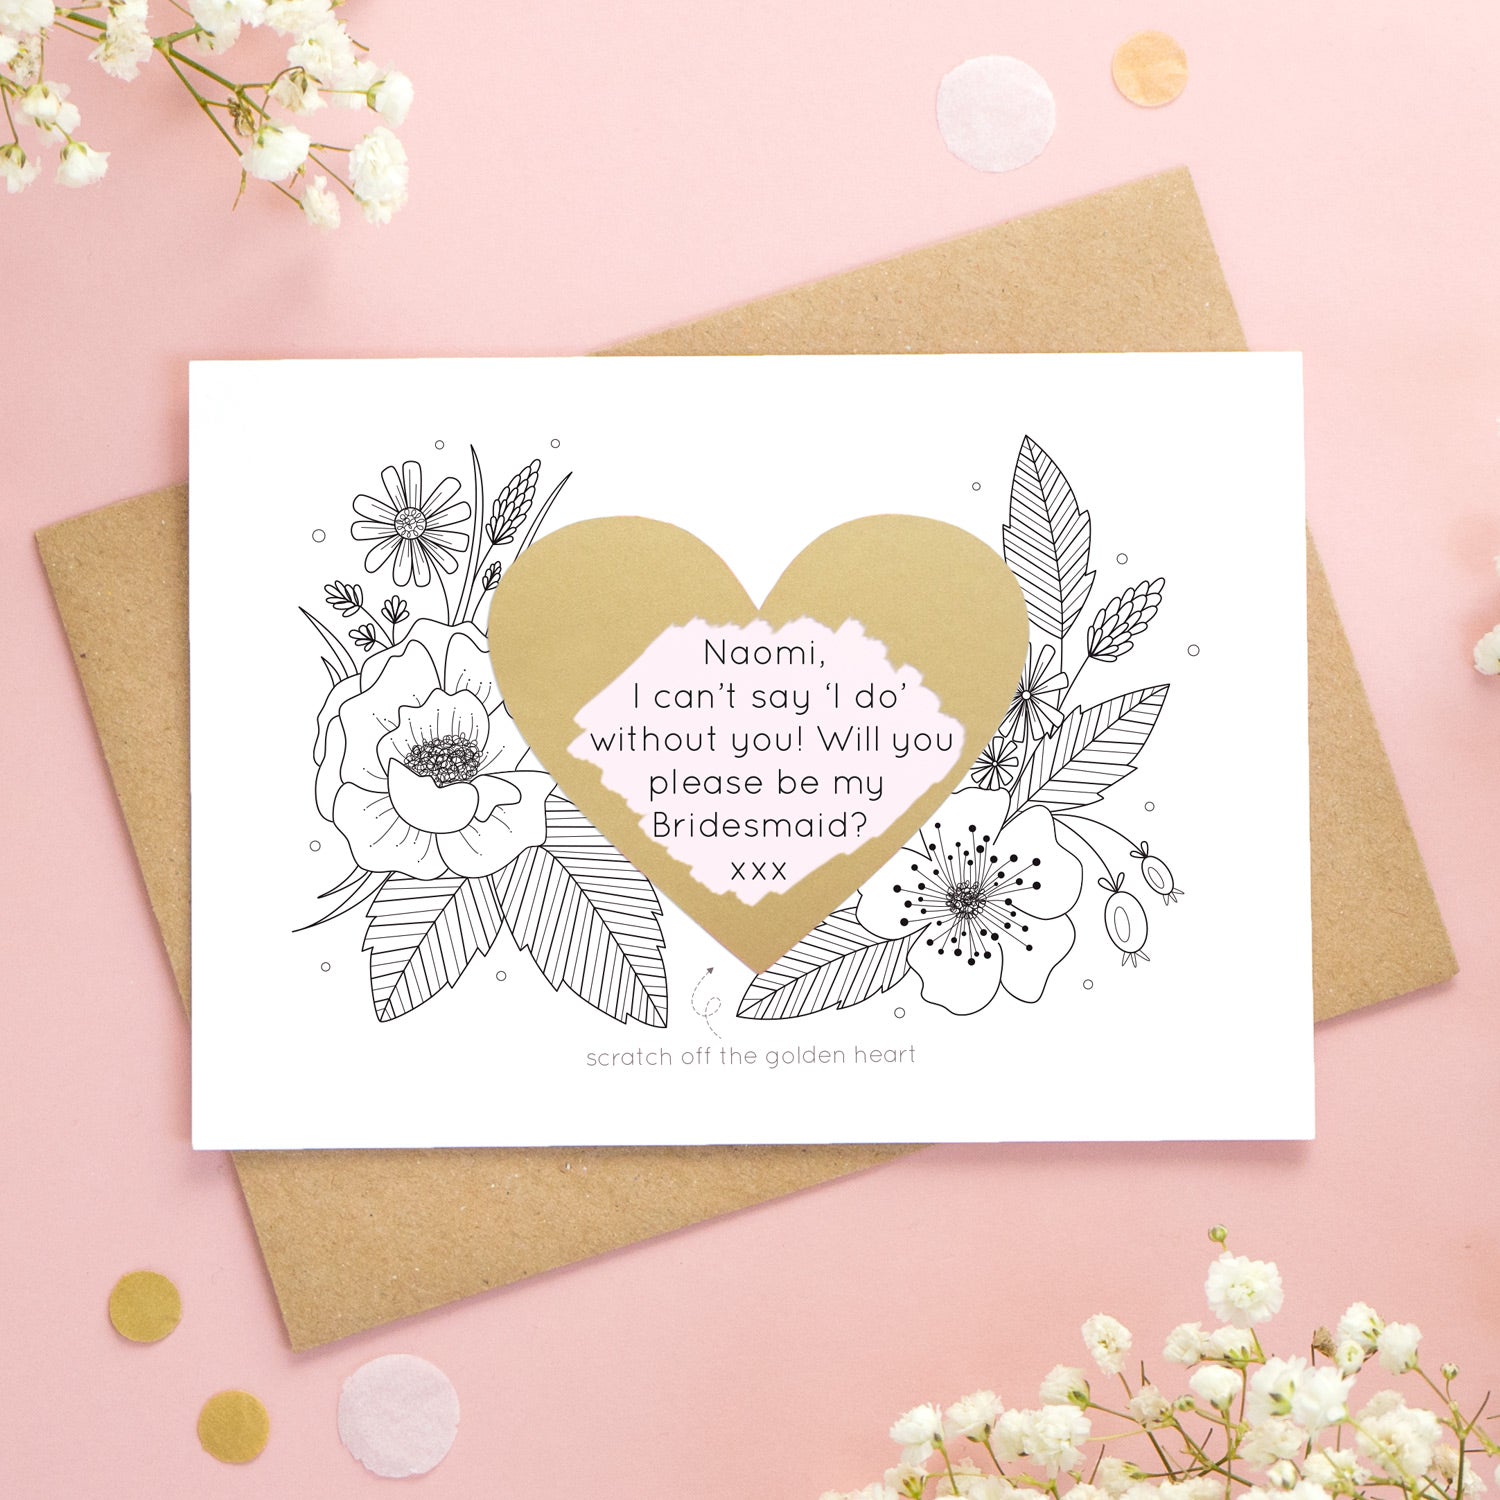 A personalised wedding scratch card shot on a pink background with white flowers. The golden heart has been scratched revealing a pink heart and a bridesmaid proposal!